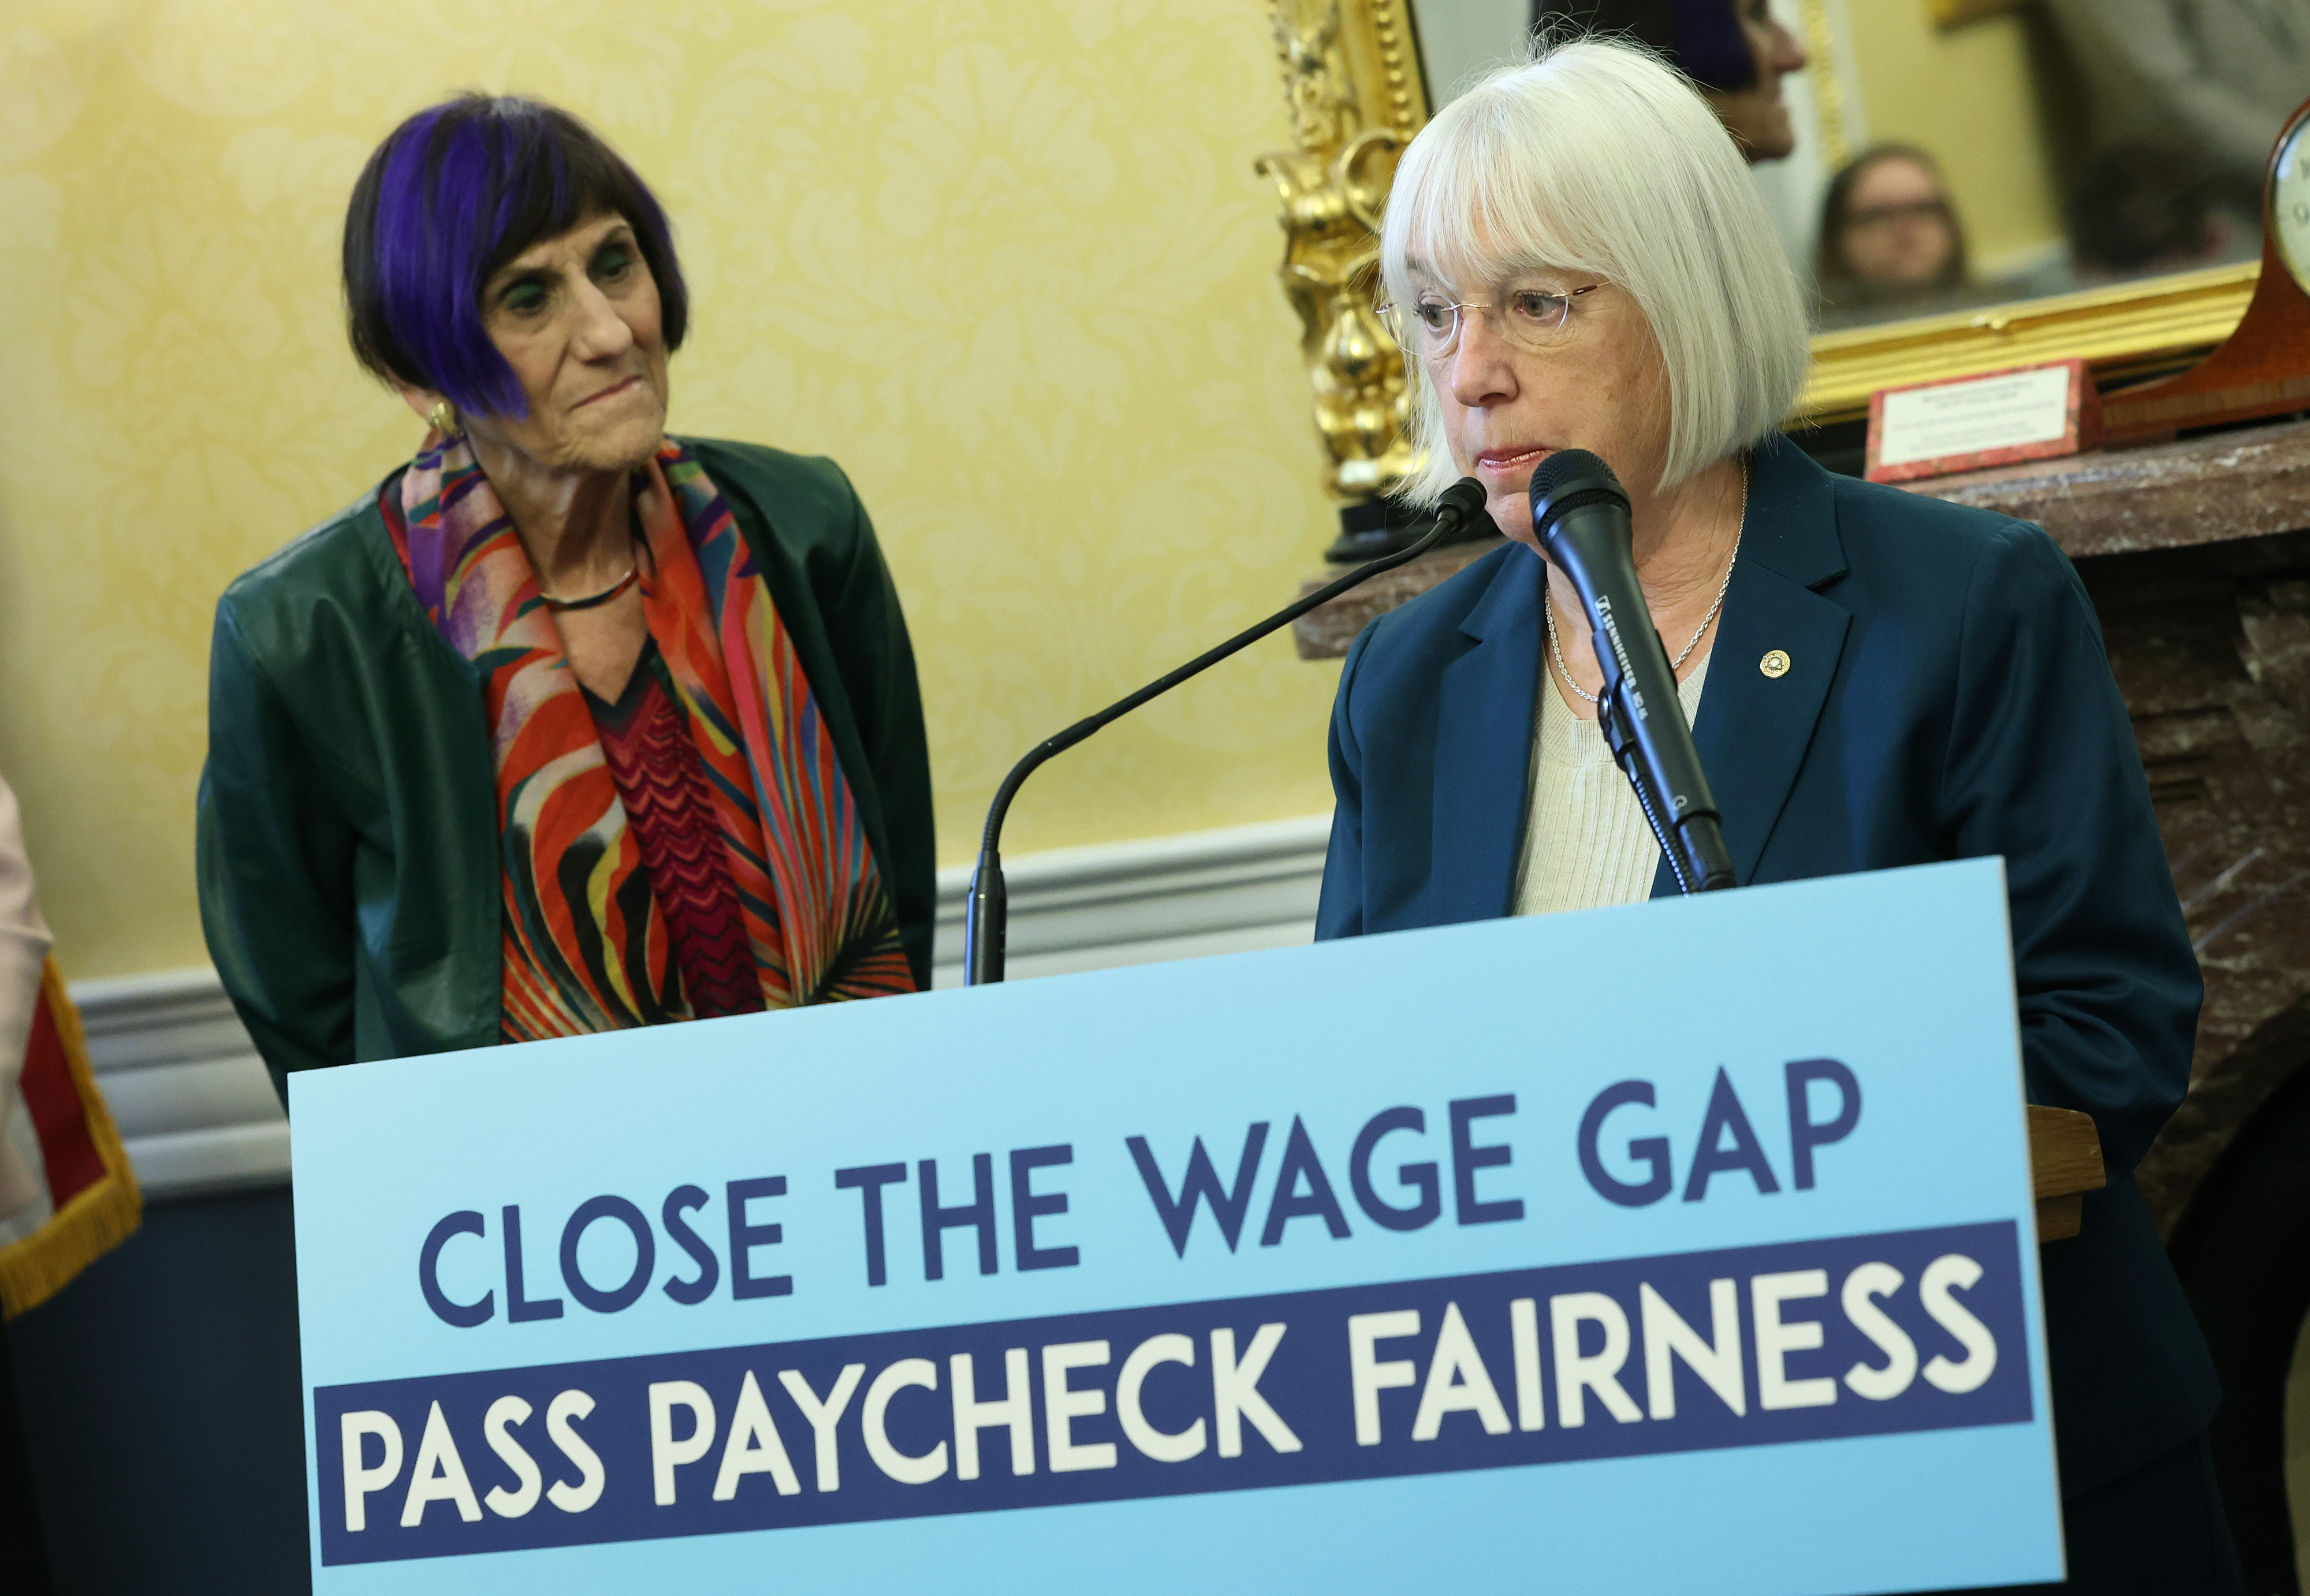 Women with sign that advocates for fair pay